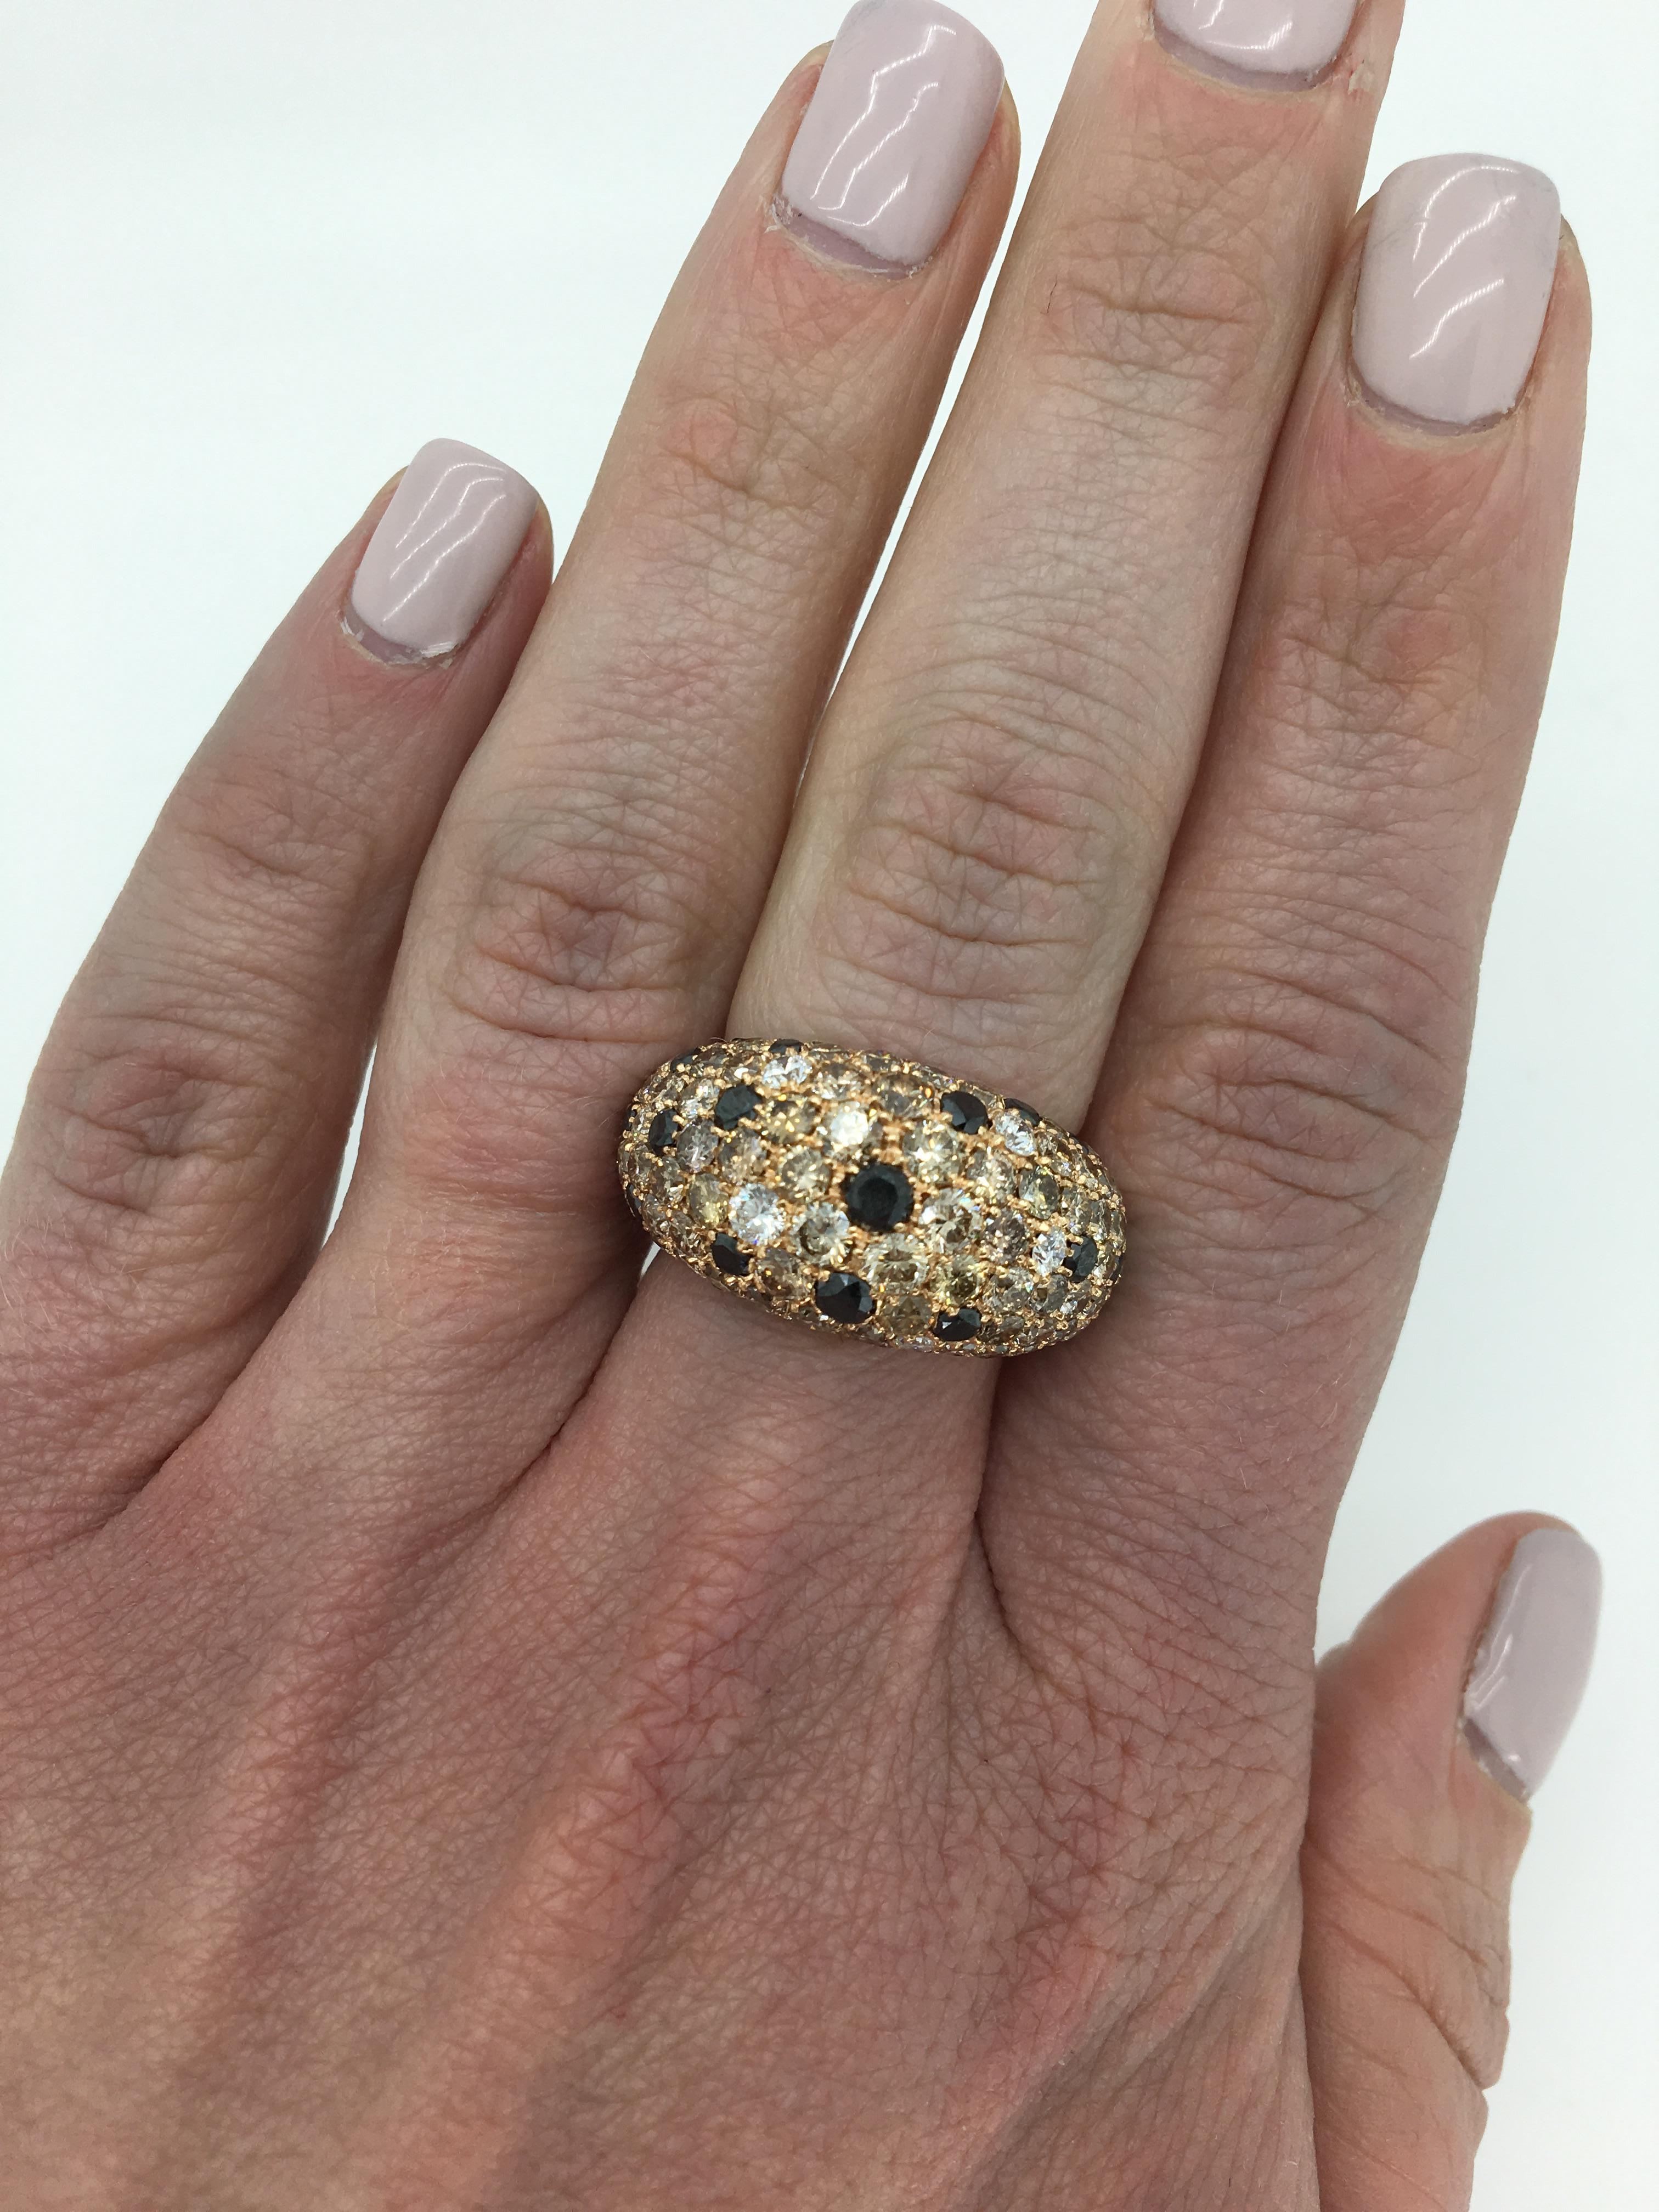 This dome style ring features approximately 6.68 carats of diamonds with a unique color variance cast in 18k rose gold.

Total Approximate Diamond Carat Weight: Approximately 6.68ctw
Diamond Cut: Round Brilliant
Color: Approximately .49CTW with